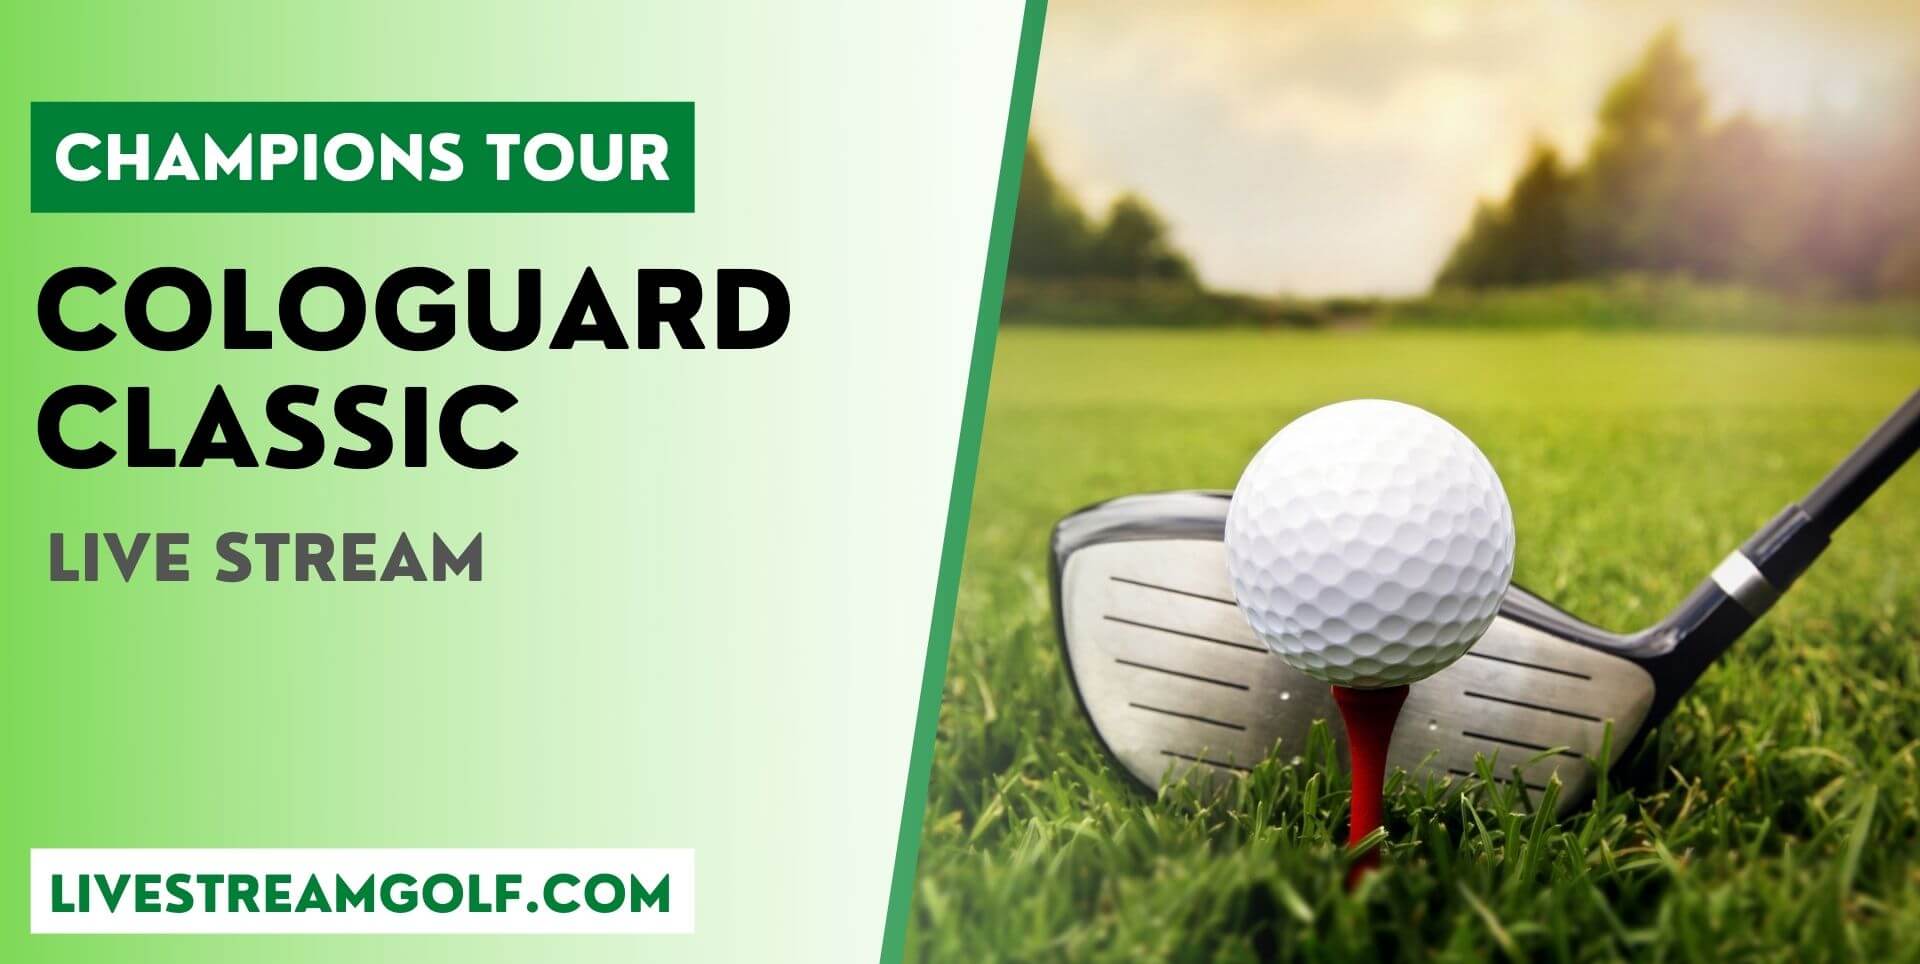 cologuard-classic-live-streaming-golf-champions-tour